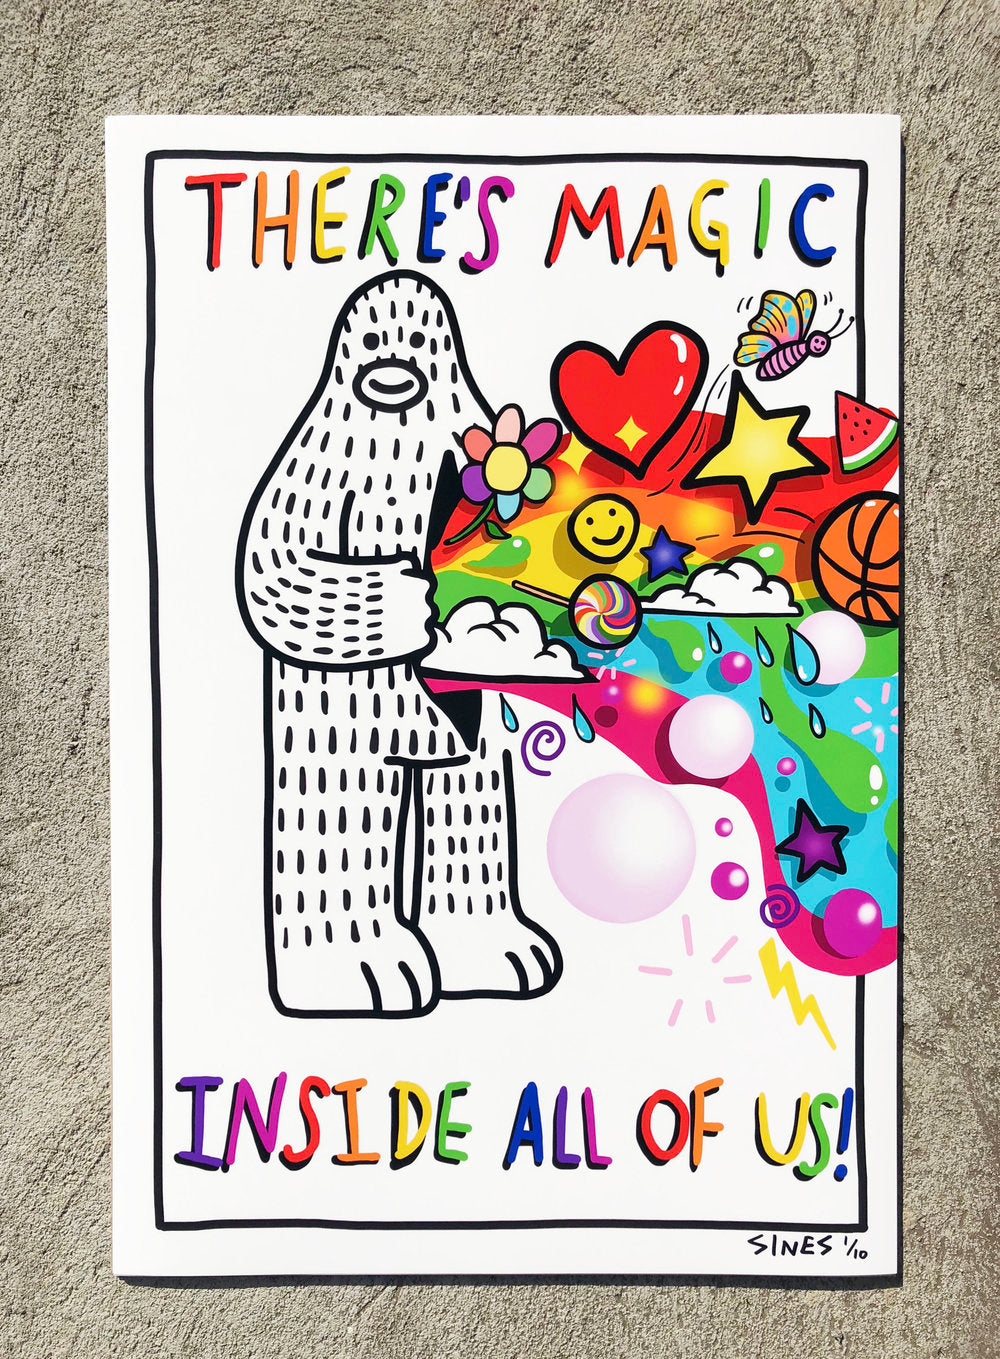 #7 - There's Magic Inside All Of Us